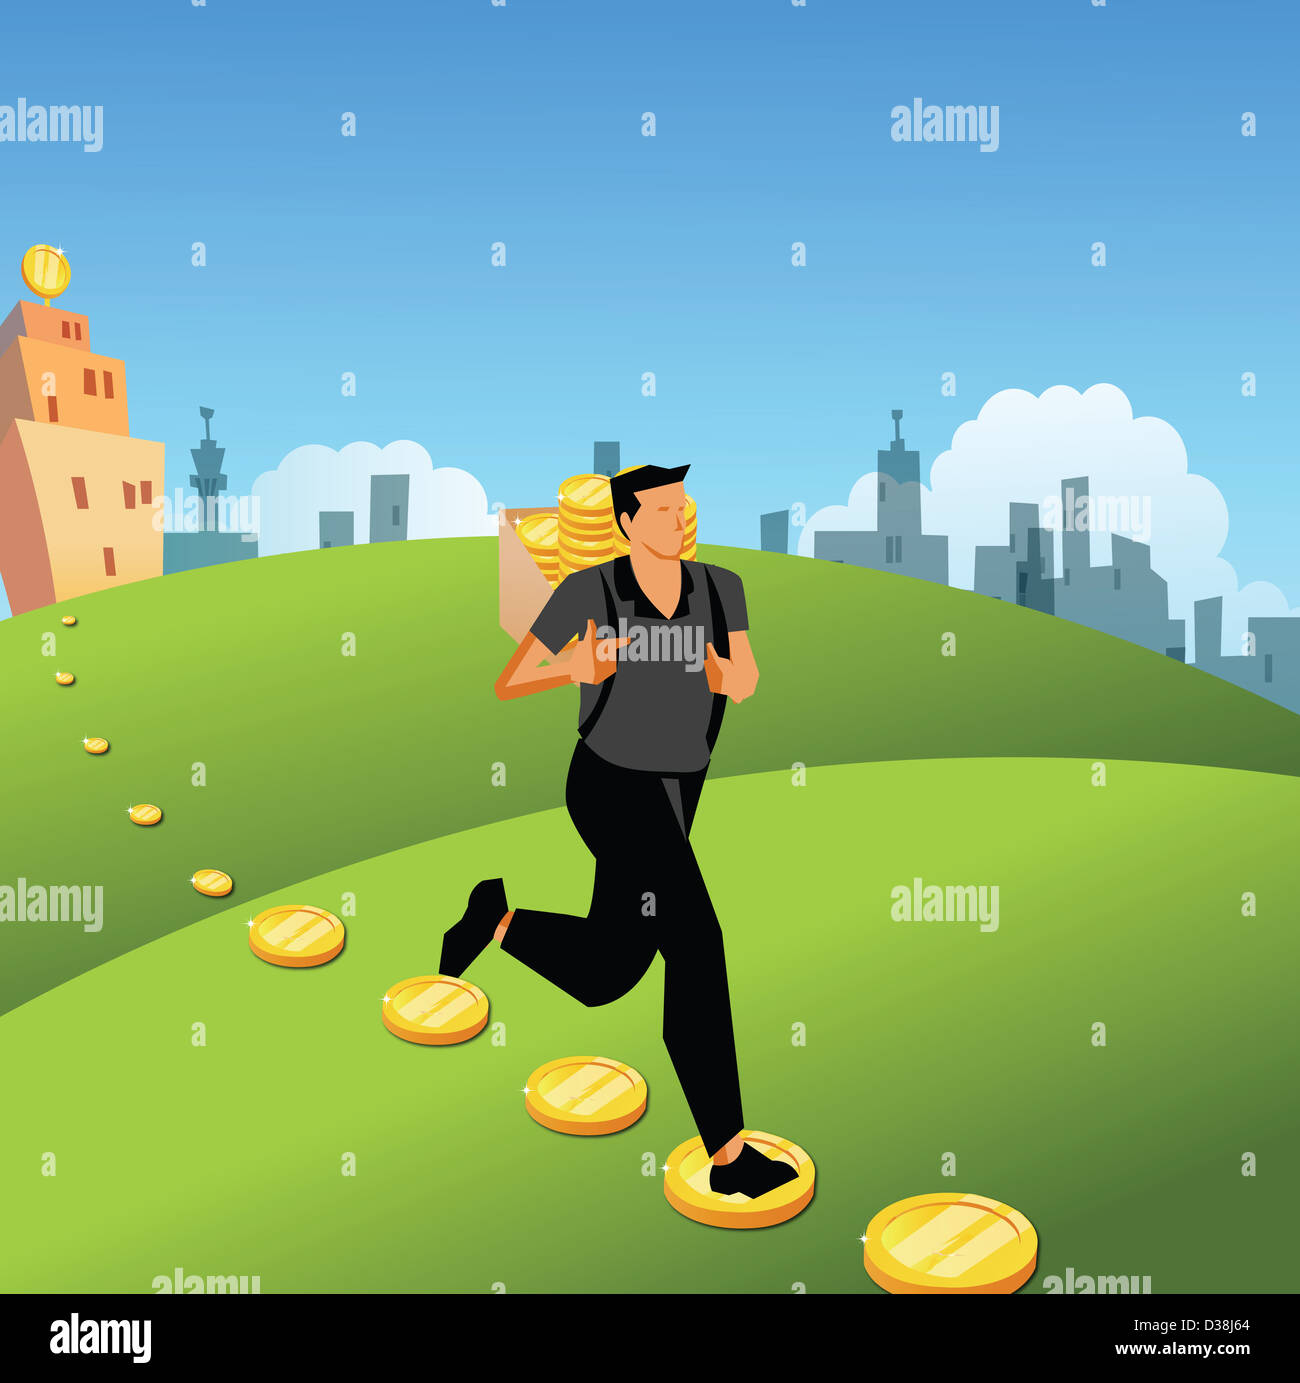 Man running with a bag of coins on his back Stock Photo